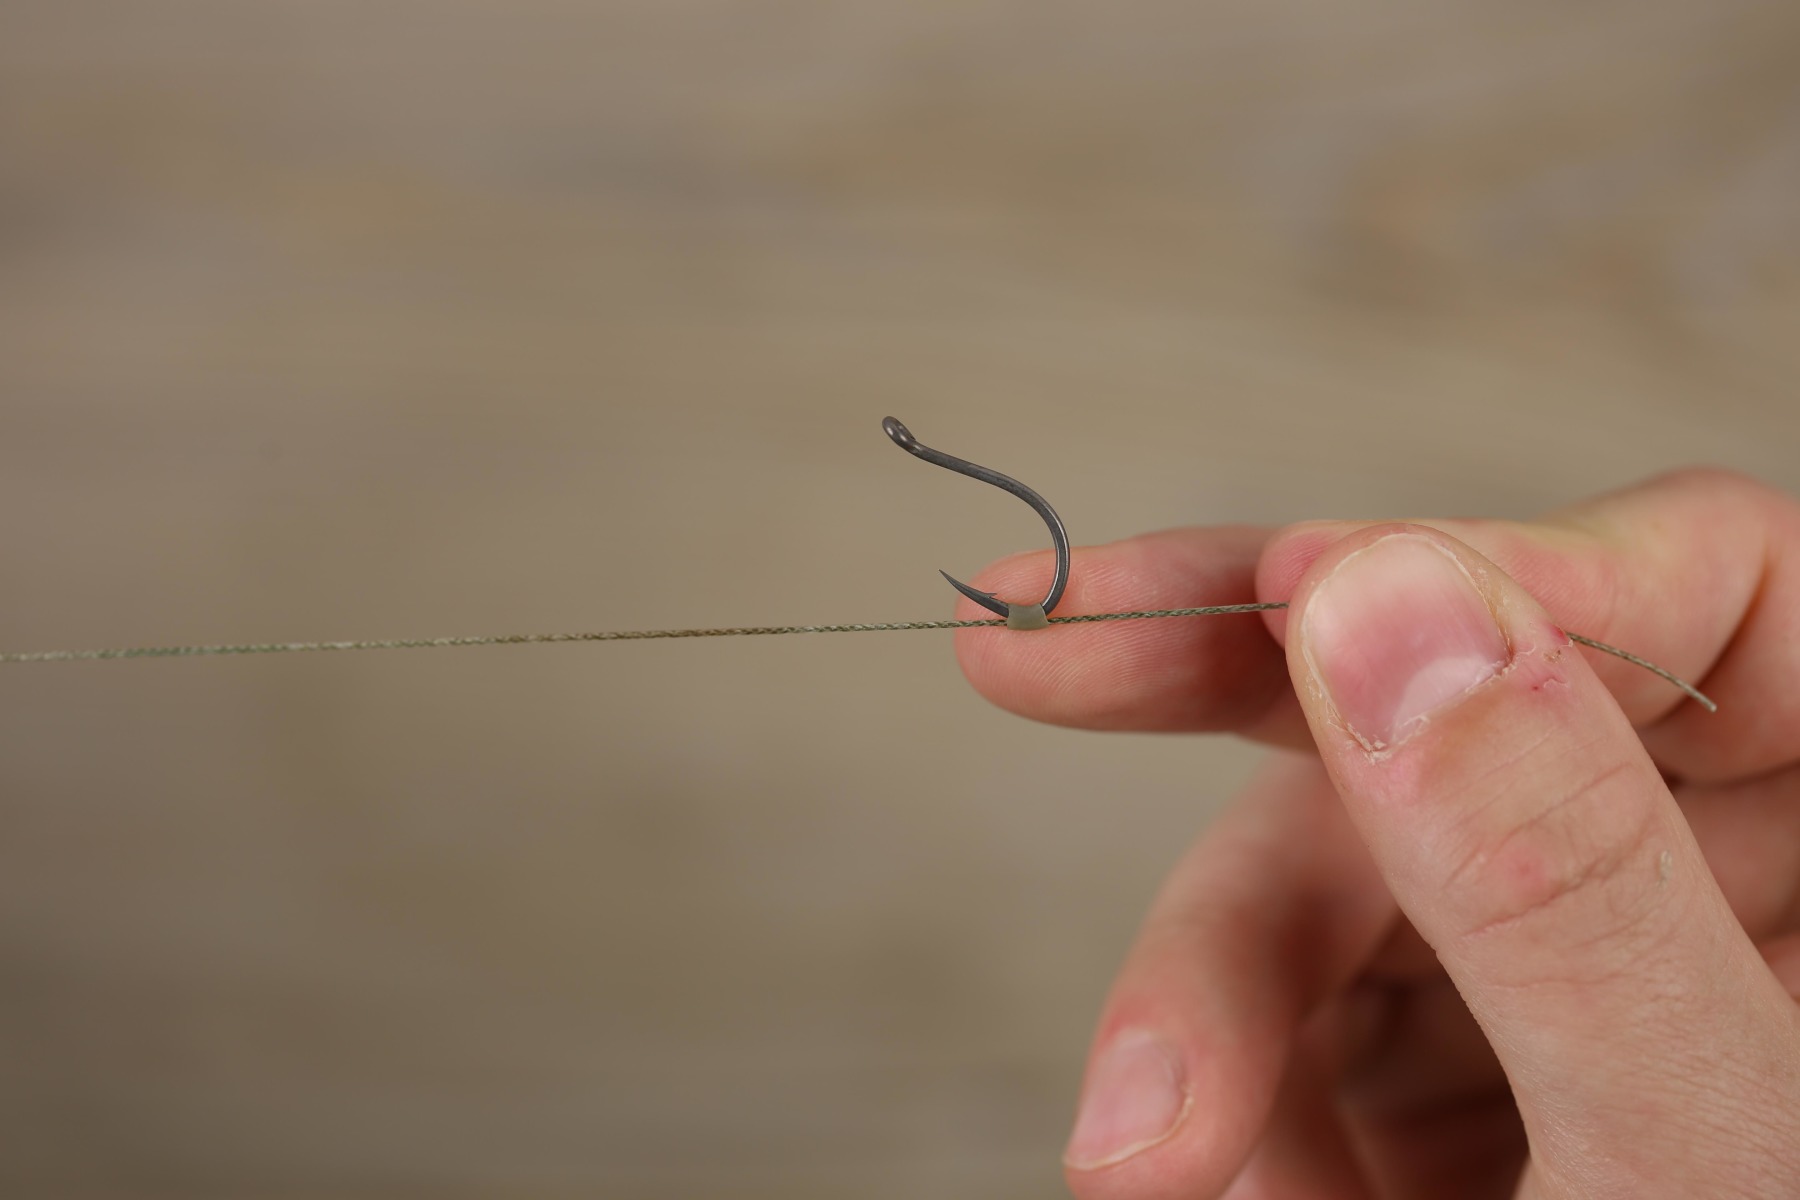 Pass your hook point through it (being careful not to pierce the side!).